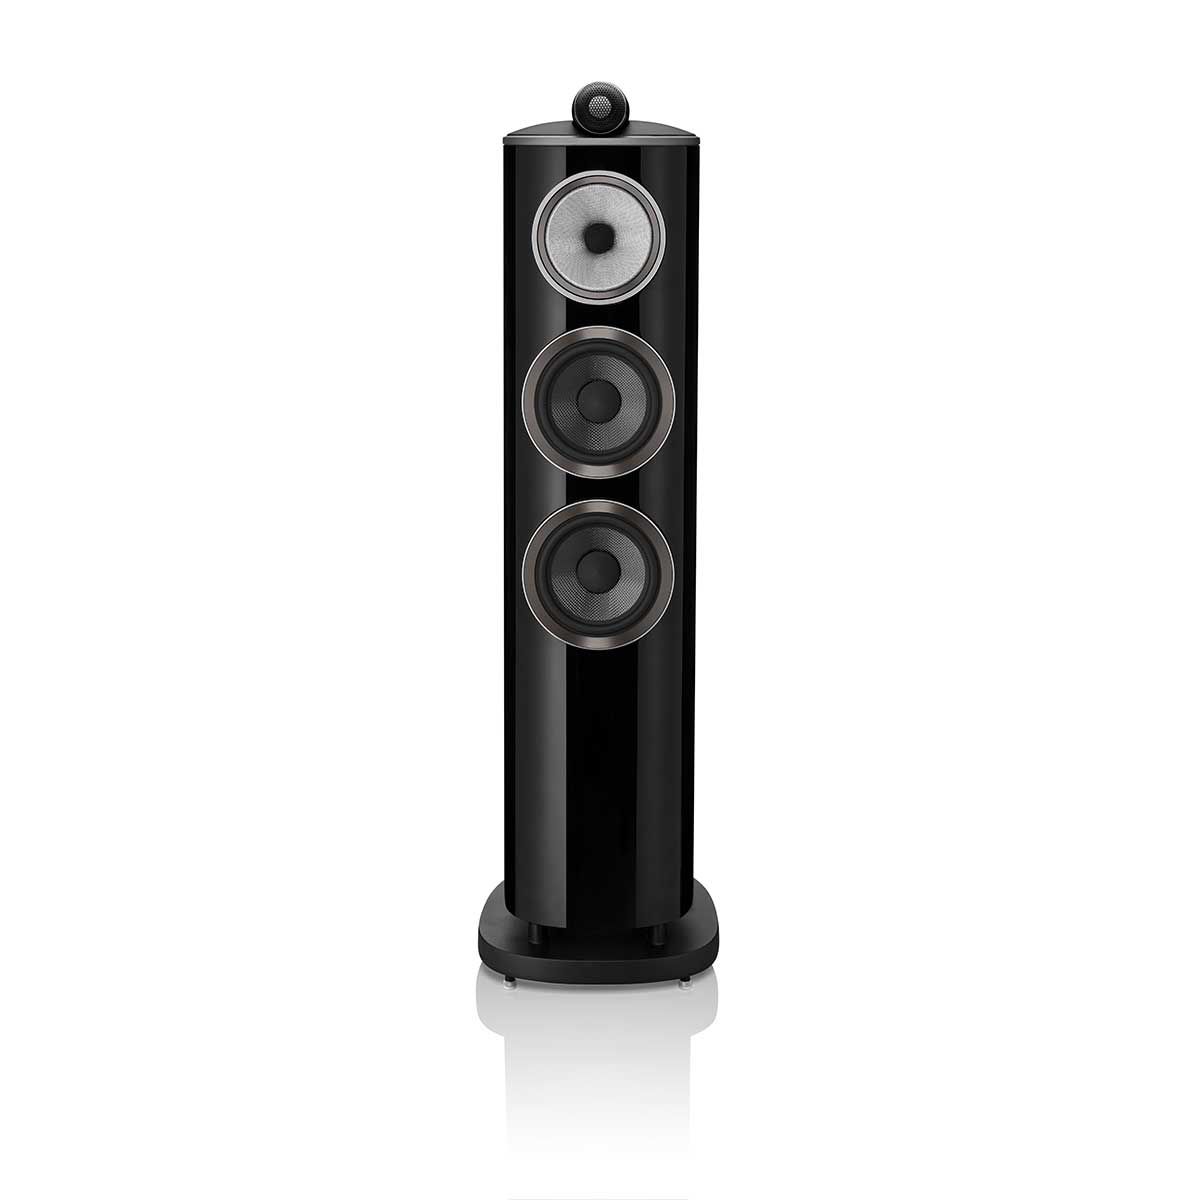 Bowers & Wilkins 804 D4 Floorstanding Speaker, Gloss Black, front view without grille